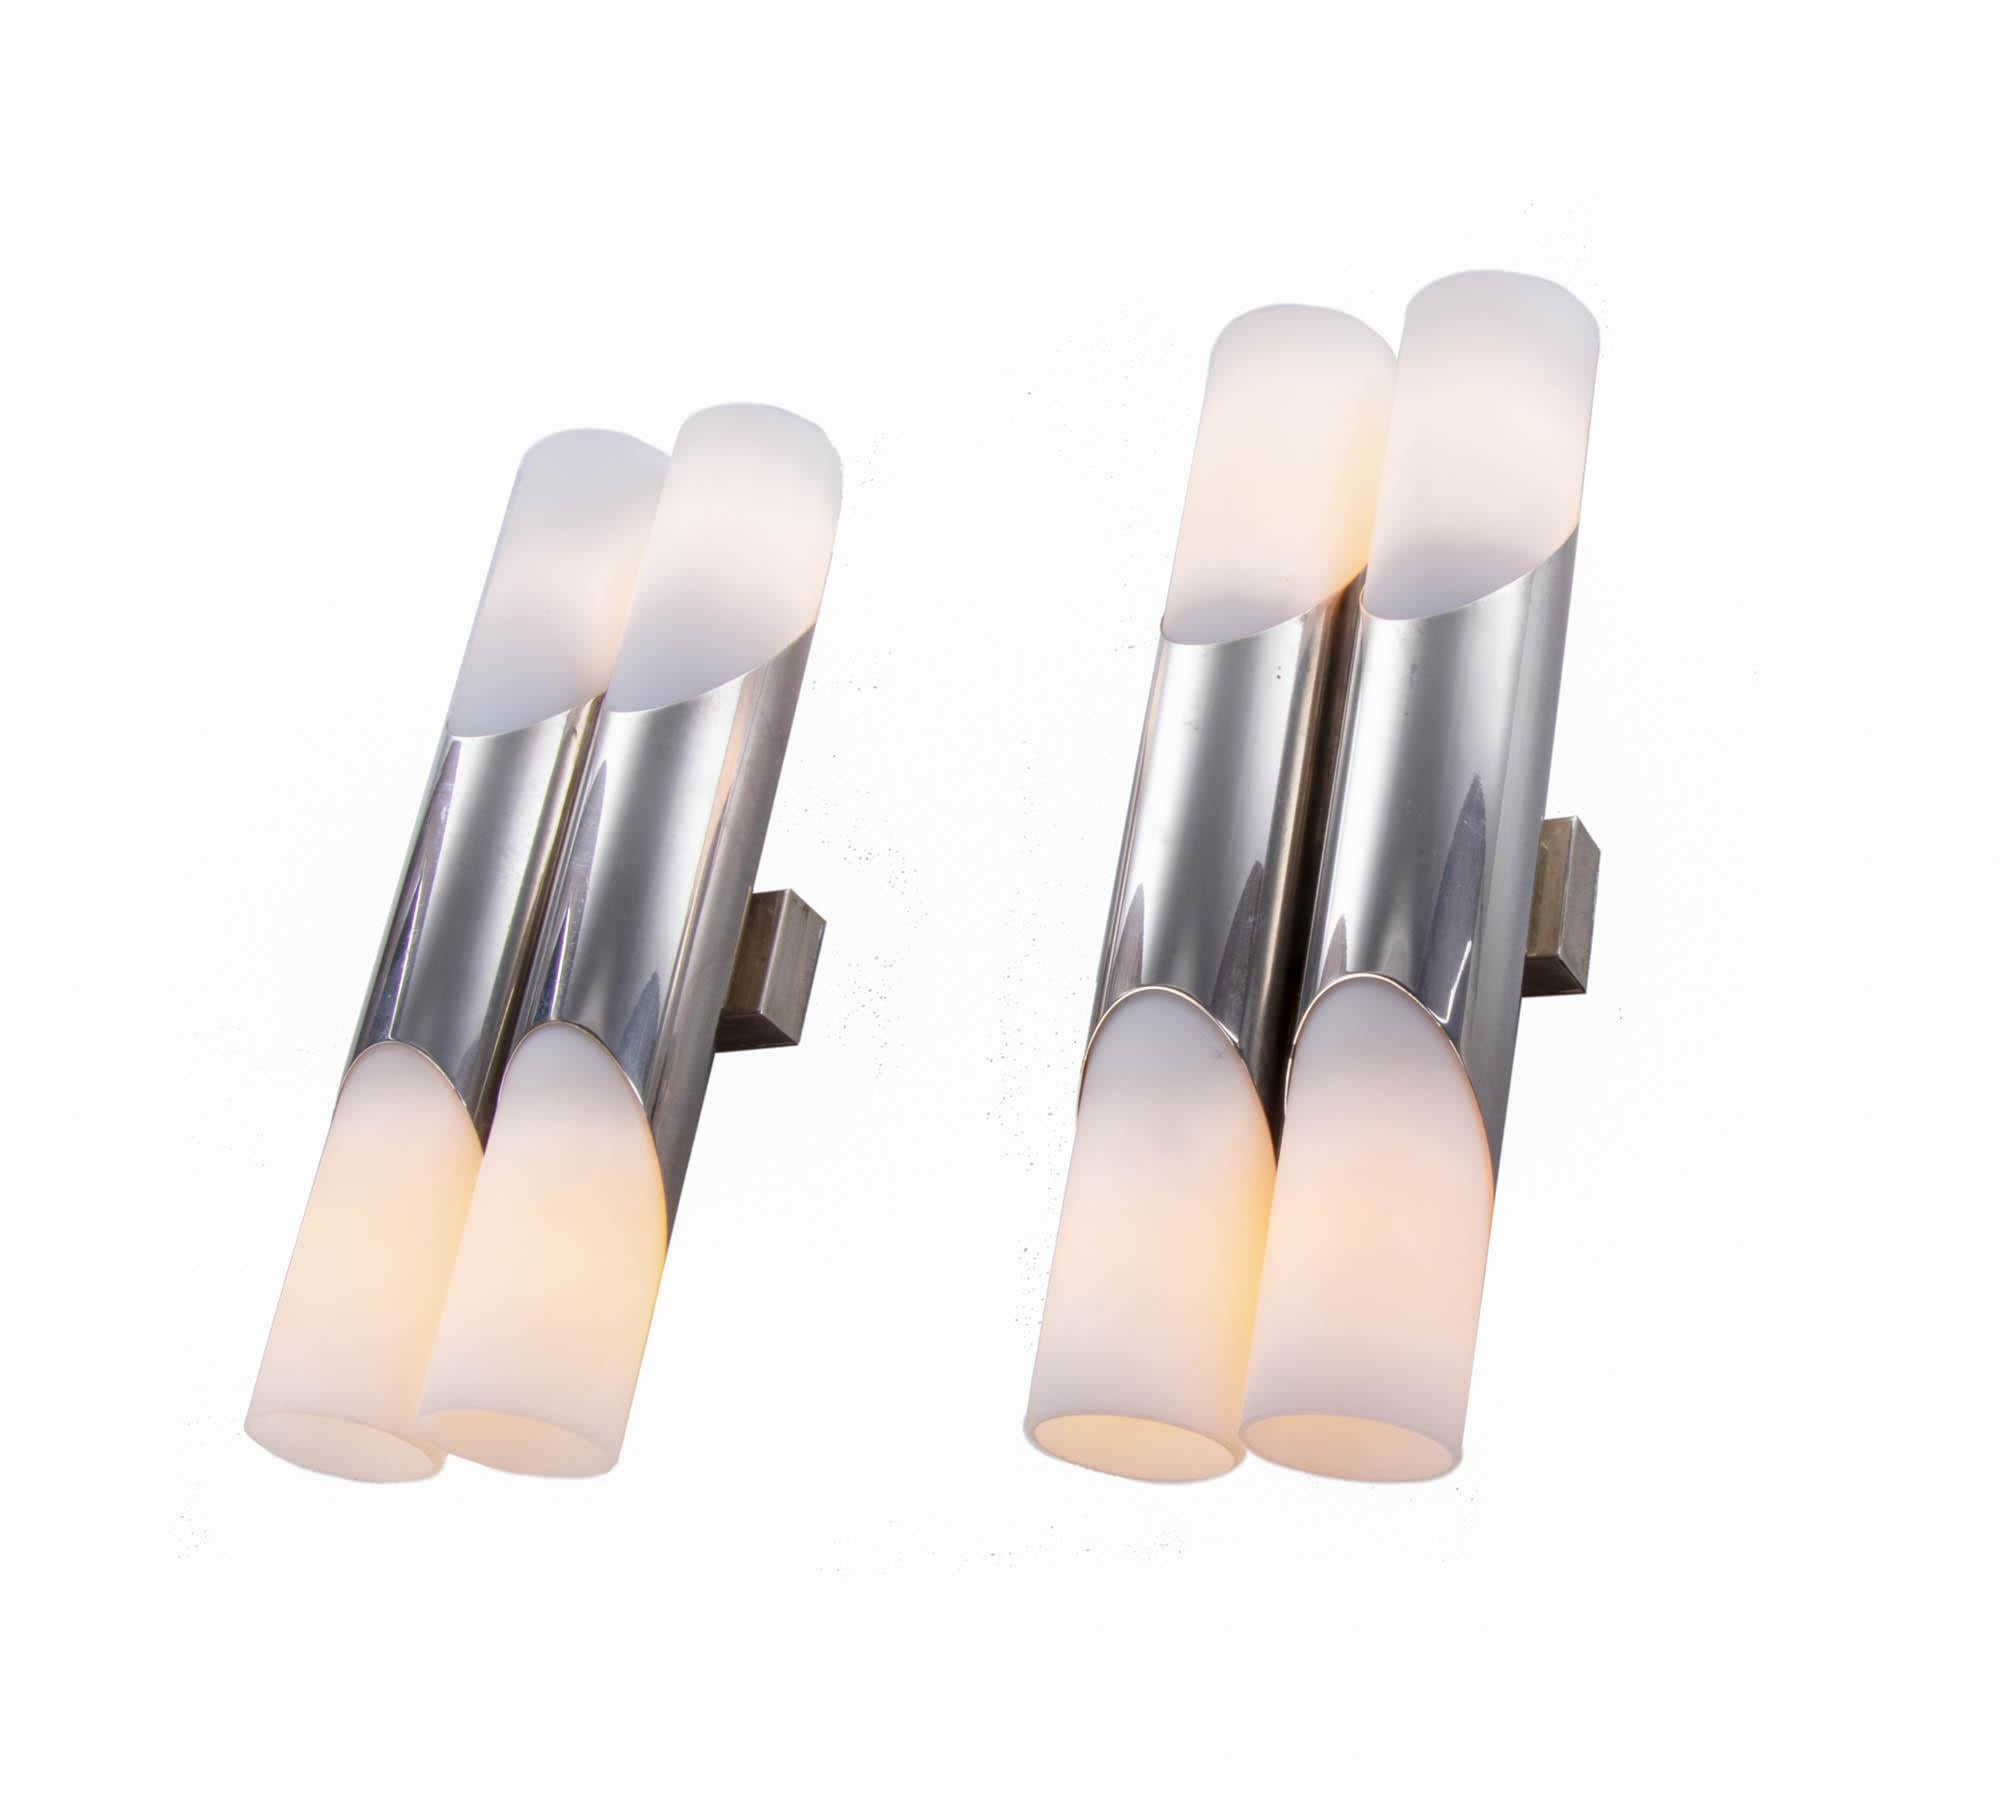 Elegant pair of modernist double wall sconces with white opal glass diffusers on a tubular chromed frame. Designed by Rolf Kruger. Manufactured by Neuhaus Lighting, Germany in the 1970s. 

Design: Rolf Kruger. 
Style: mid century, modernist.